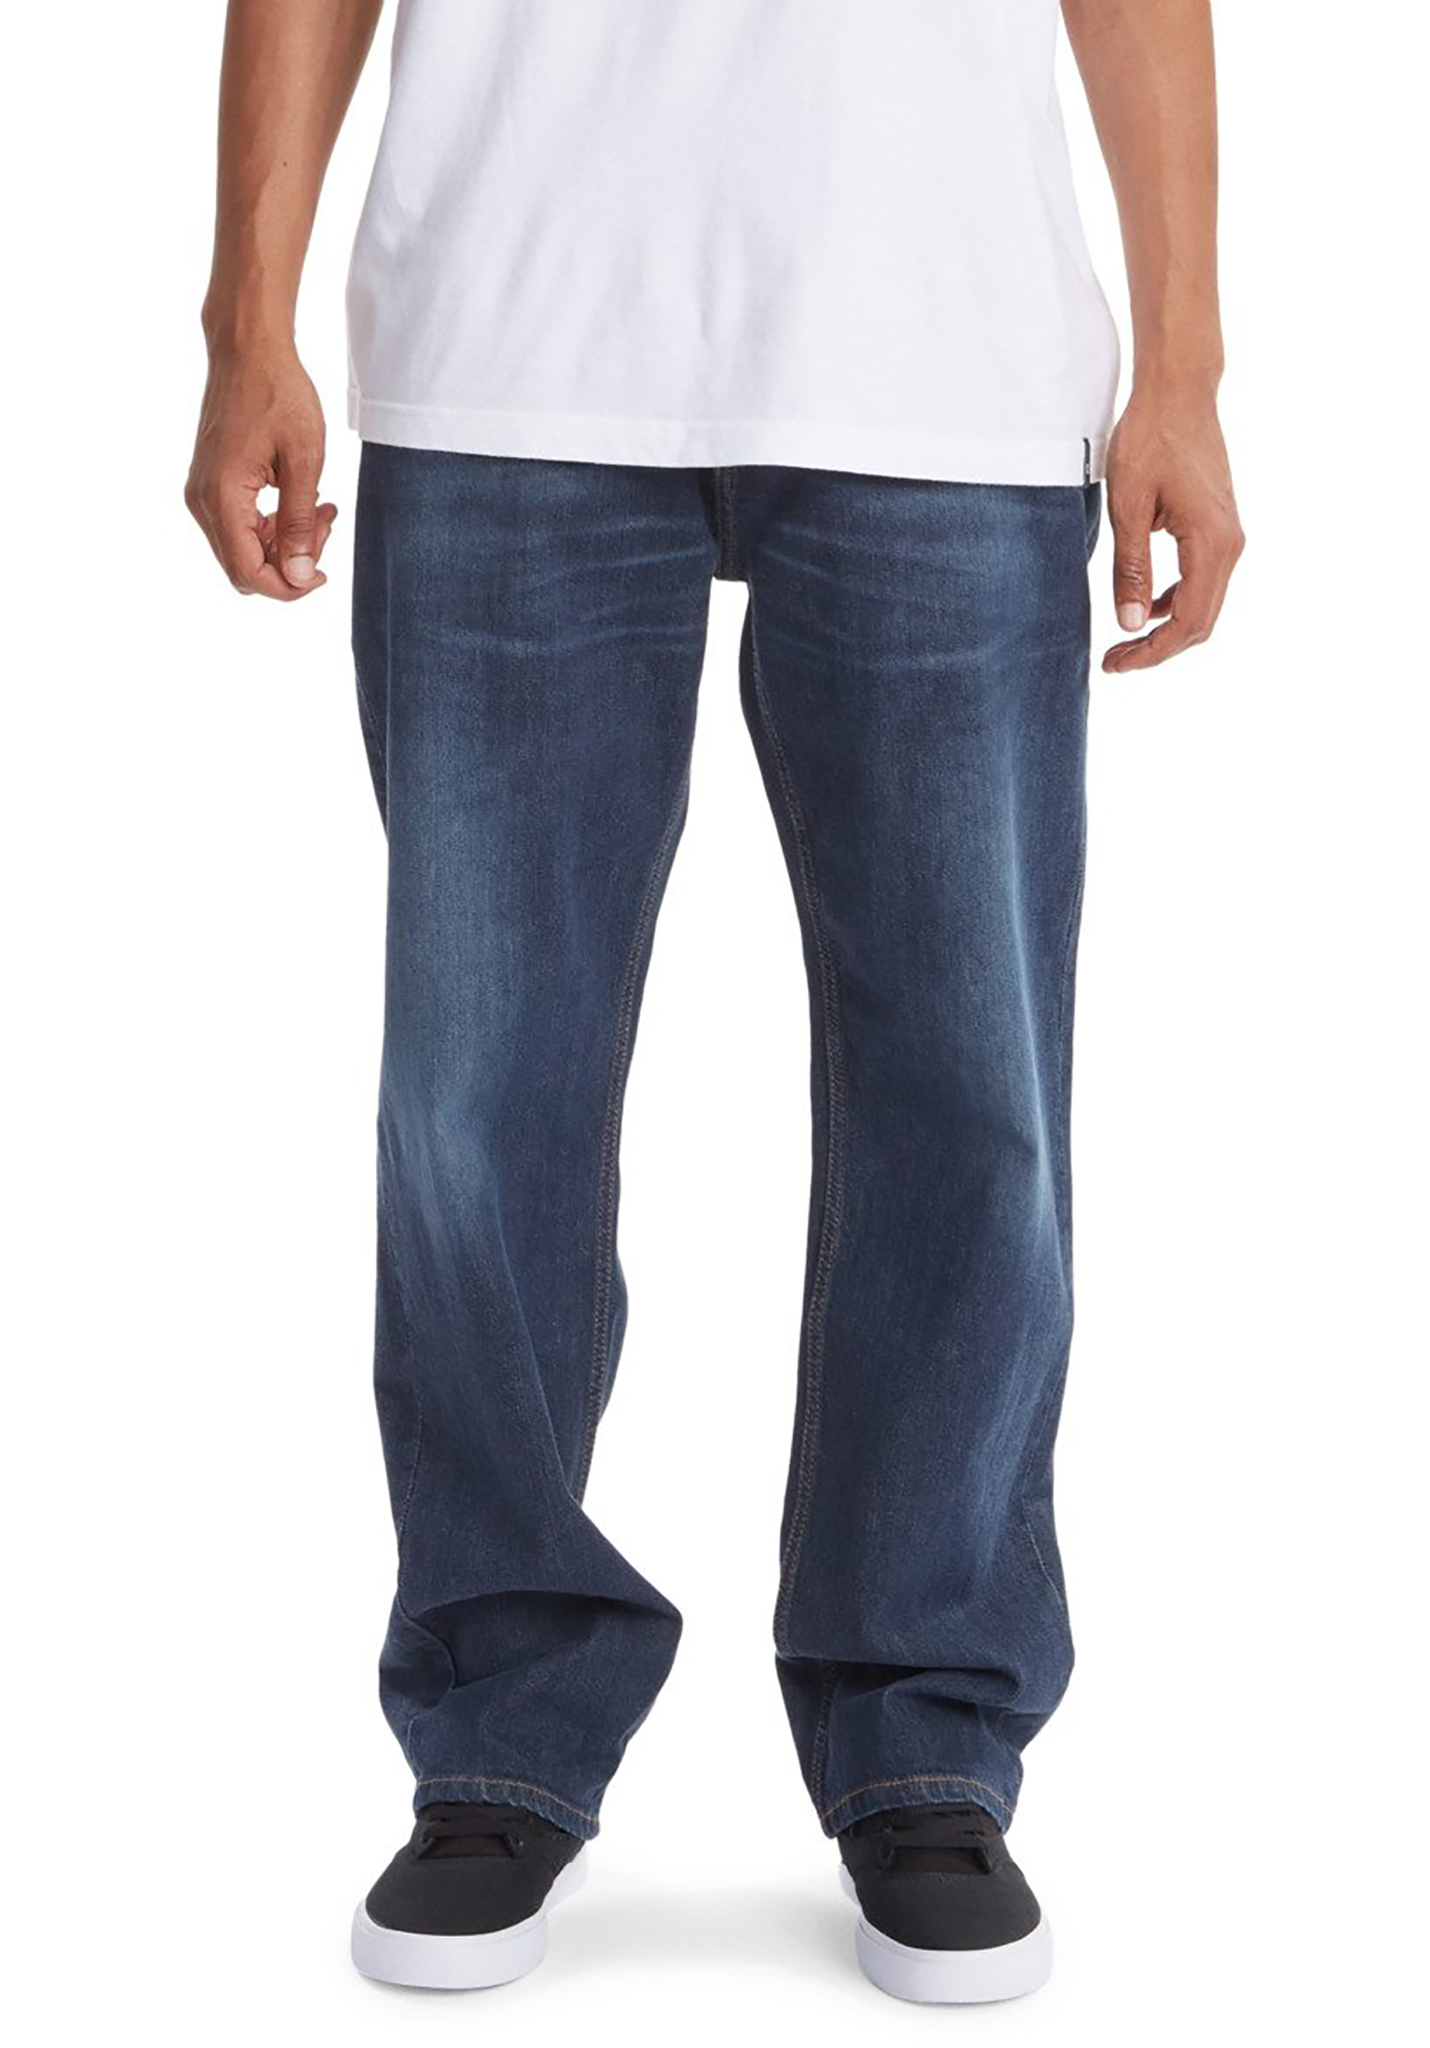 DC Worker - Relaxed Fit Jeans dunkler stein 31/32